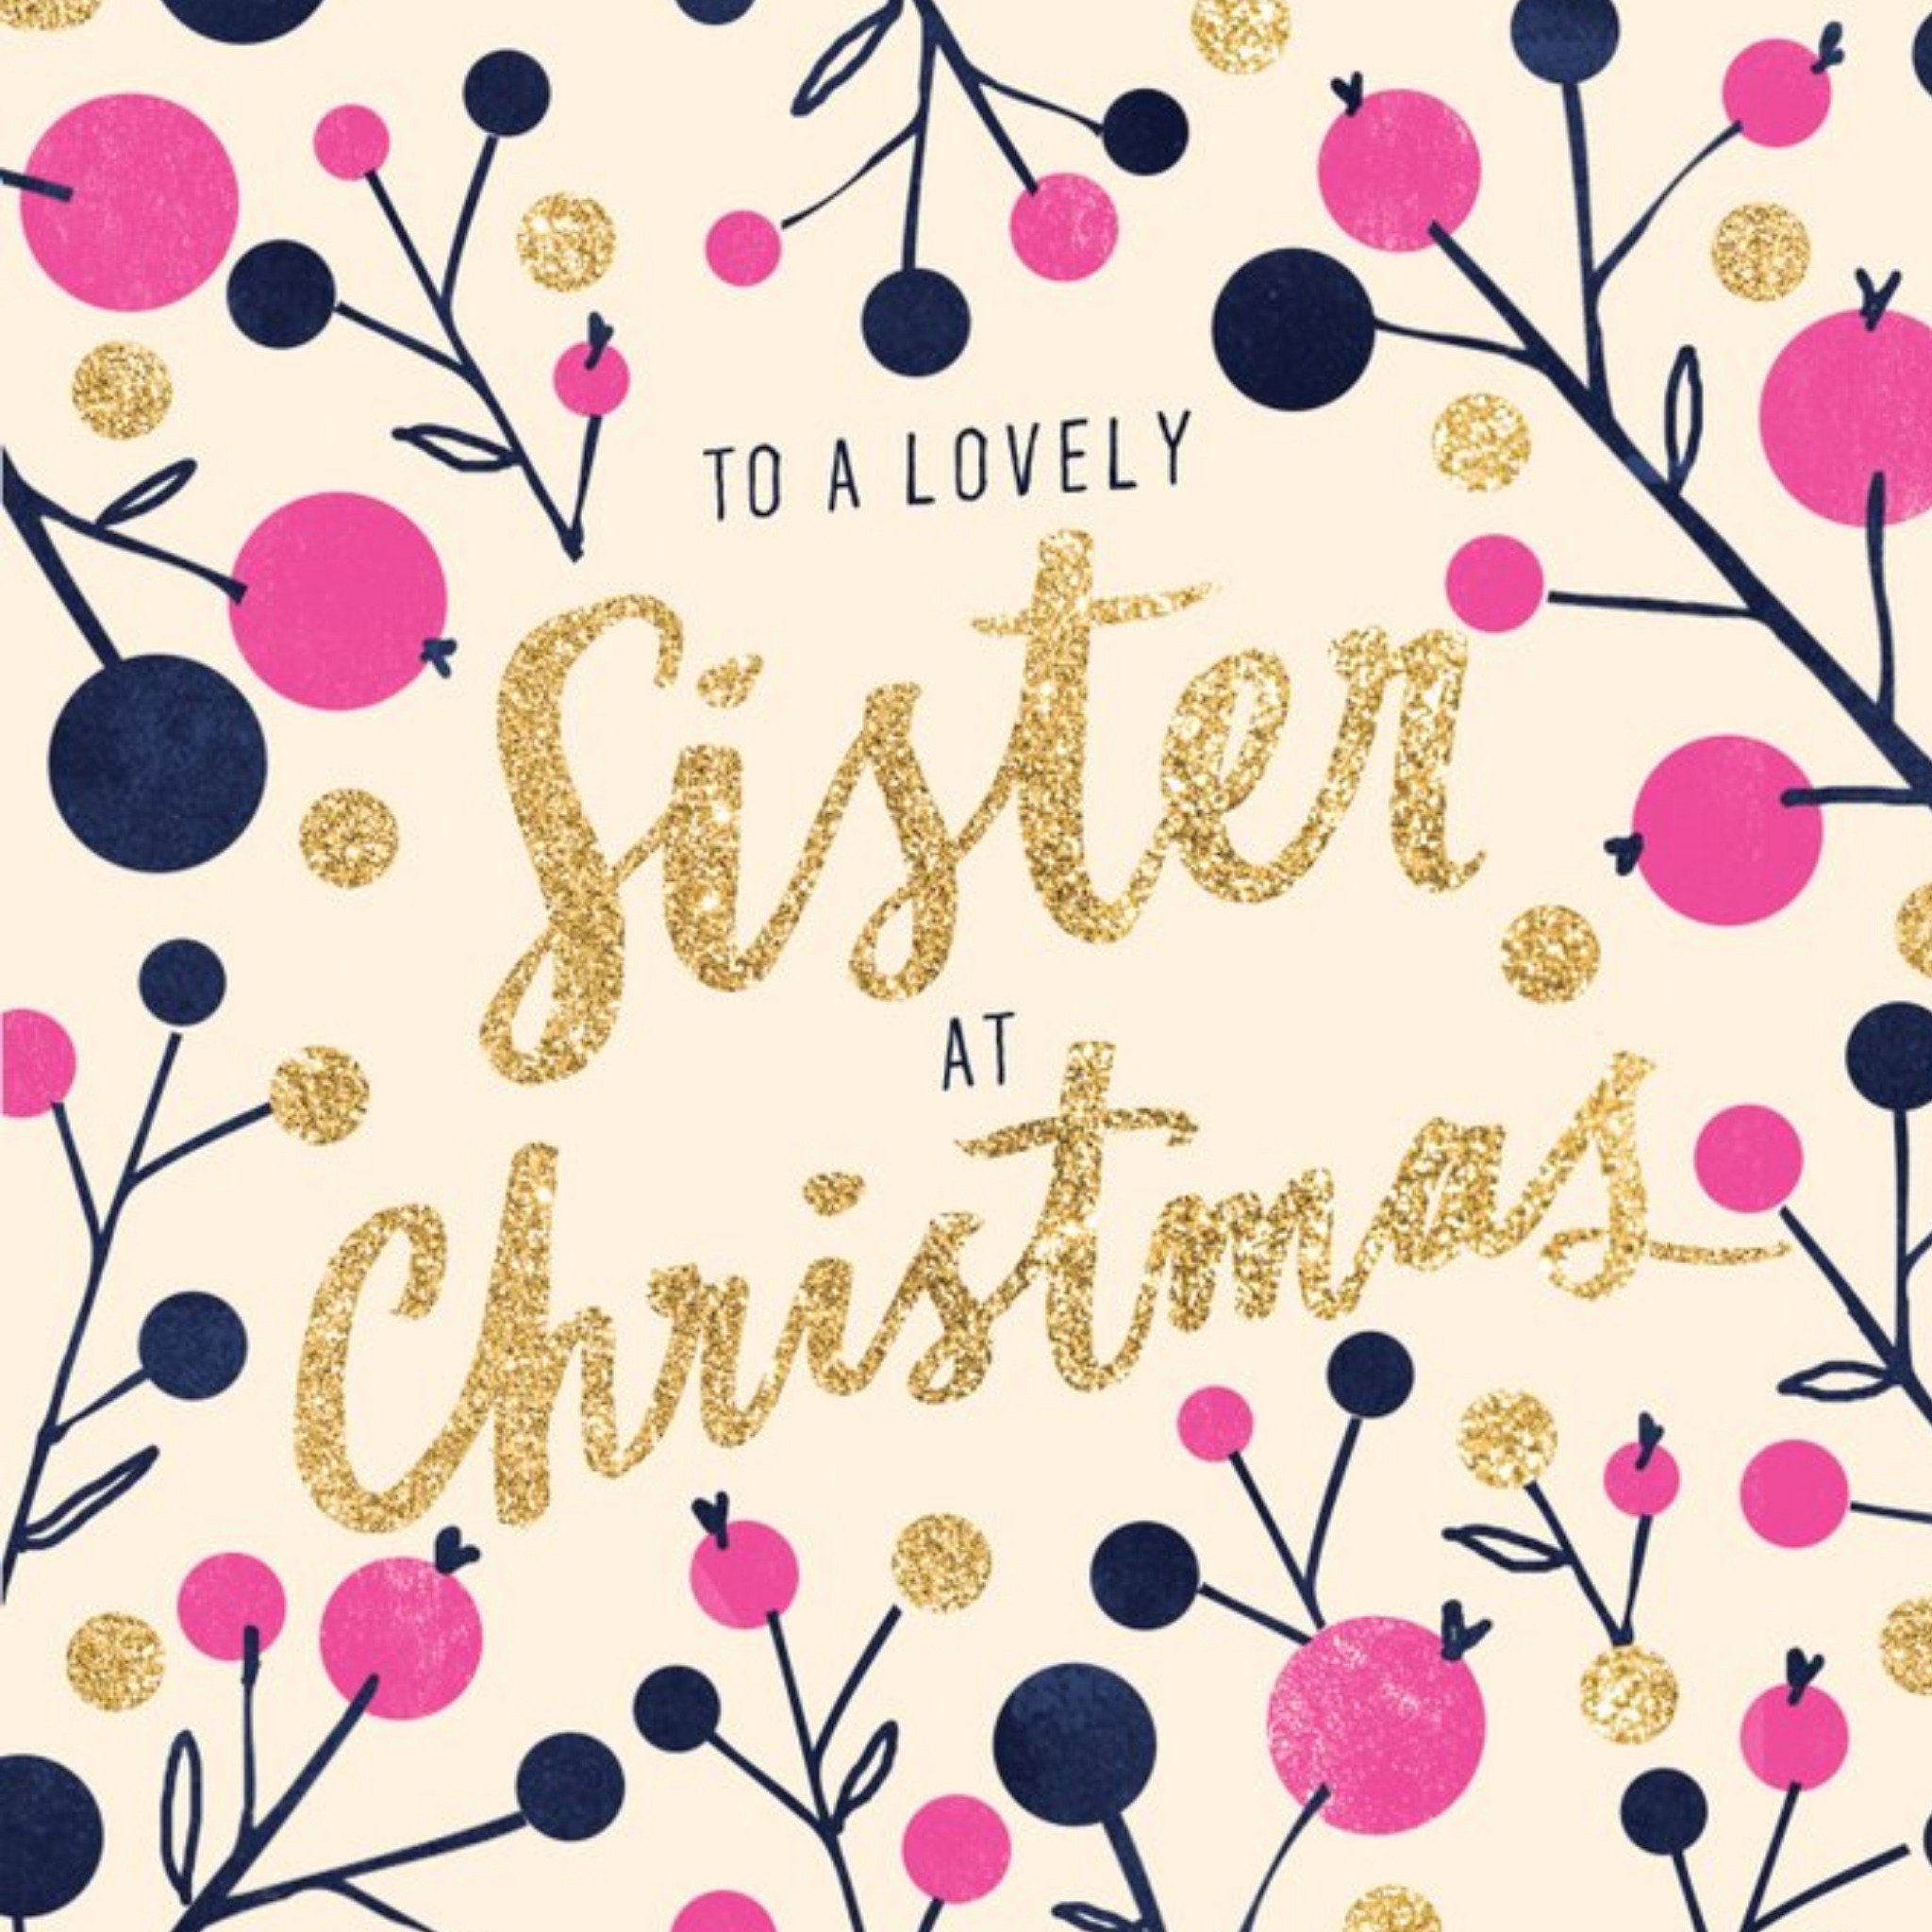 Moonpig Christmas Card - Sister - Lovely, Square